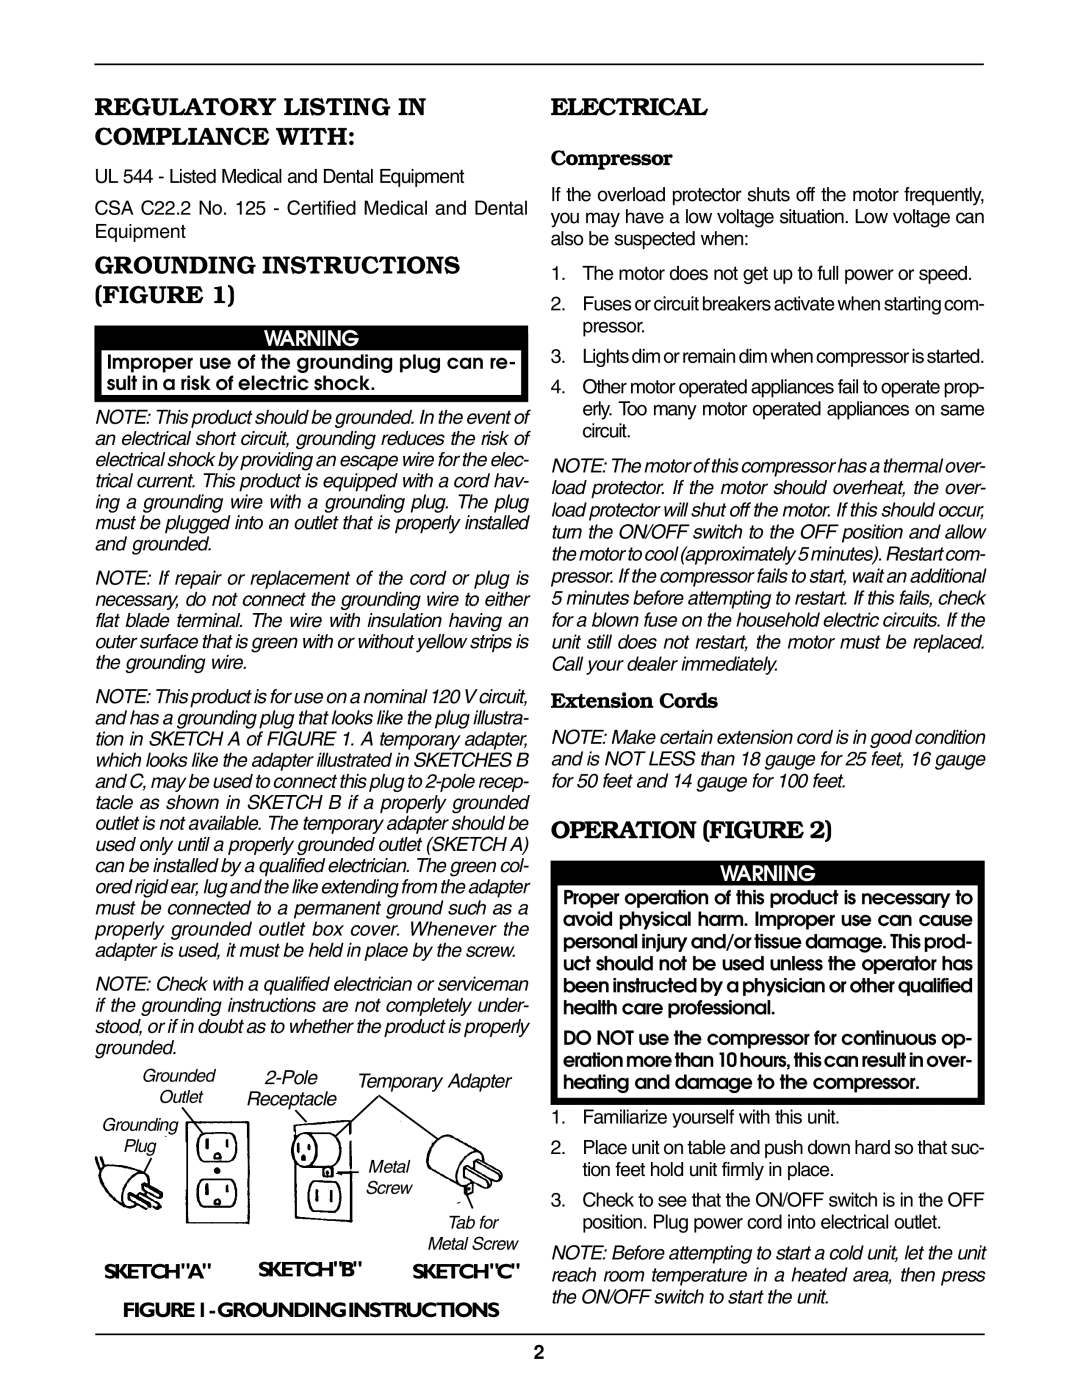 Invacare IRC607 Regulatory Listing Compliance with, Grounding Instructions Figure, Electrical, Operation Figure 